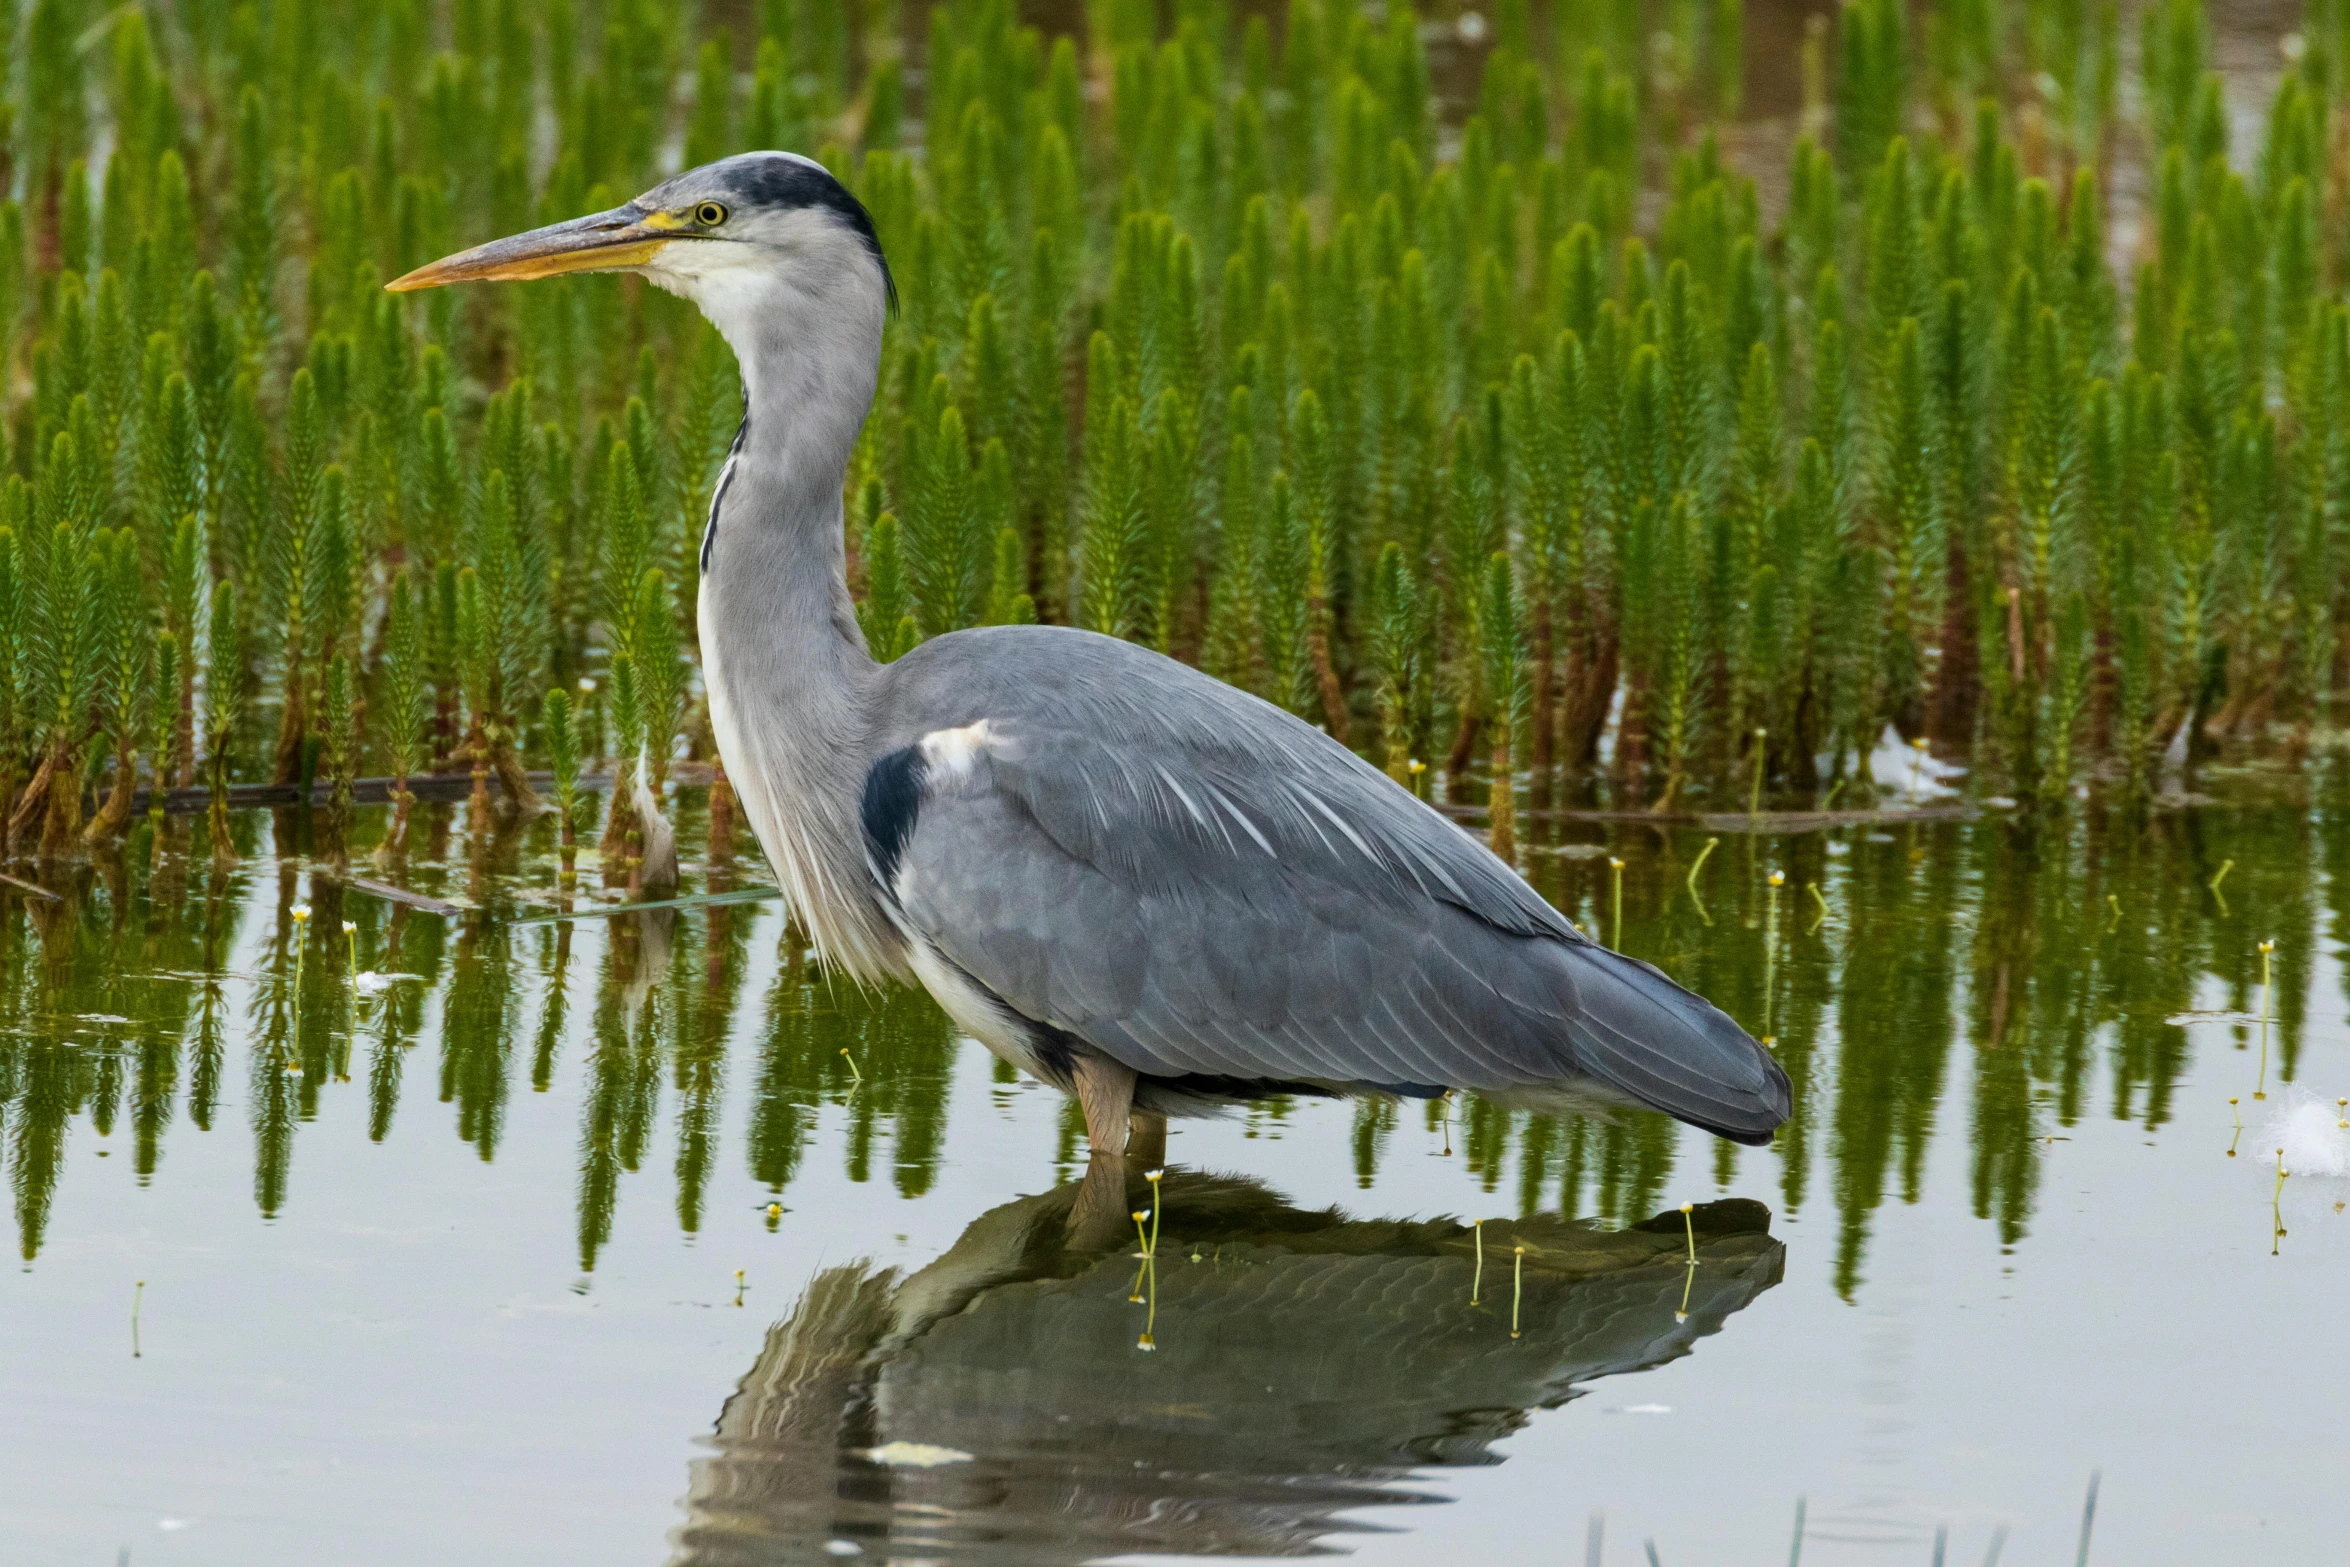 a grey heron is sitting on a rock in the water